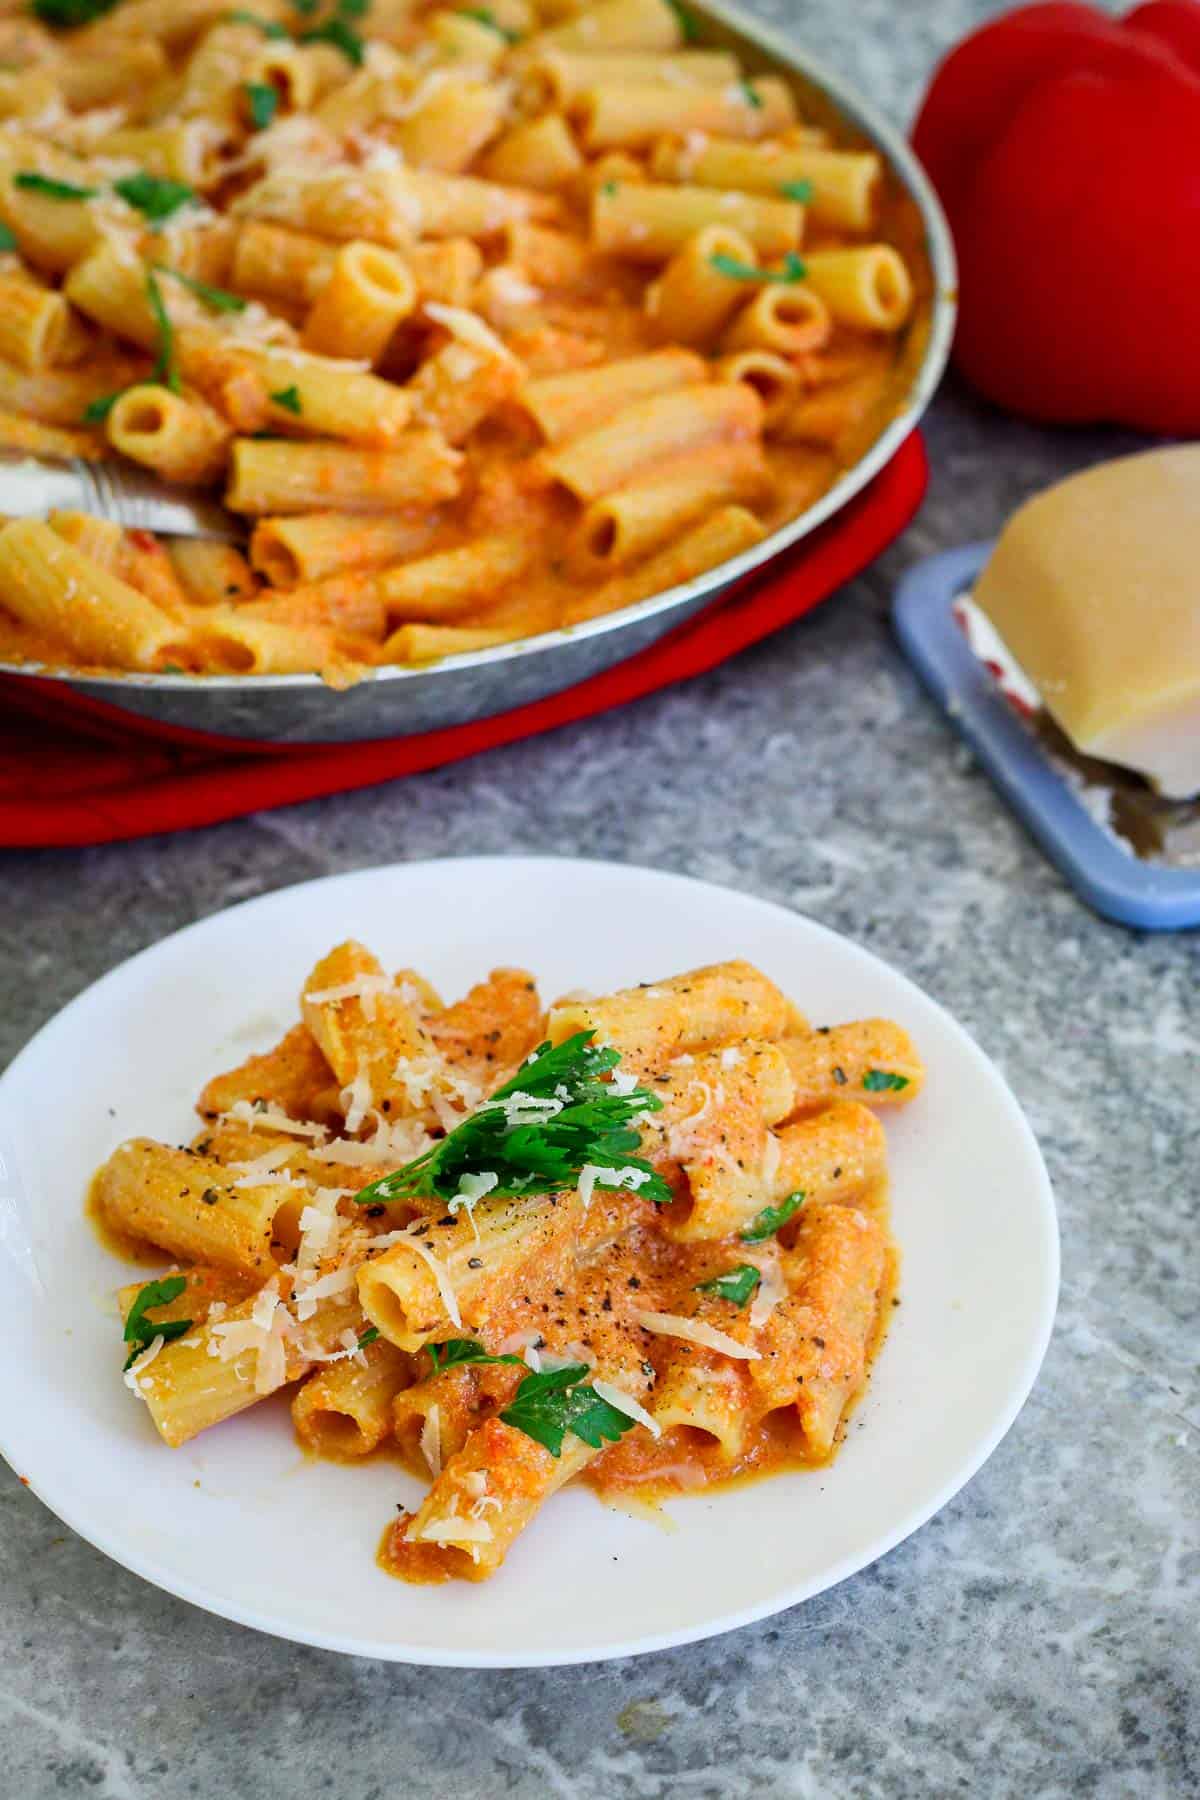 A serving of rigatoni pasta in pepper sauce. Pasta is garnished with parsley and grated cheese. Behind the plate, you can see the entire pan where pasta dish is cooked. 